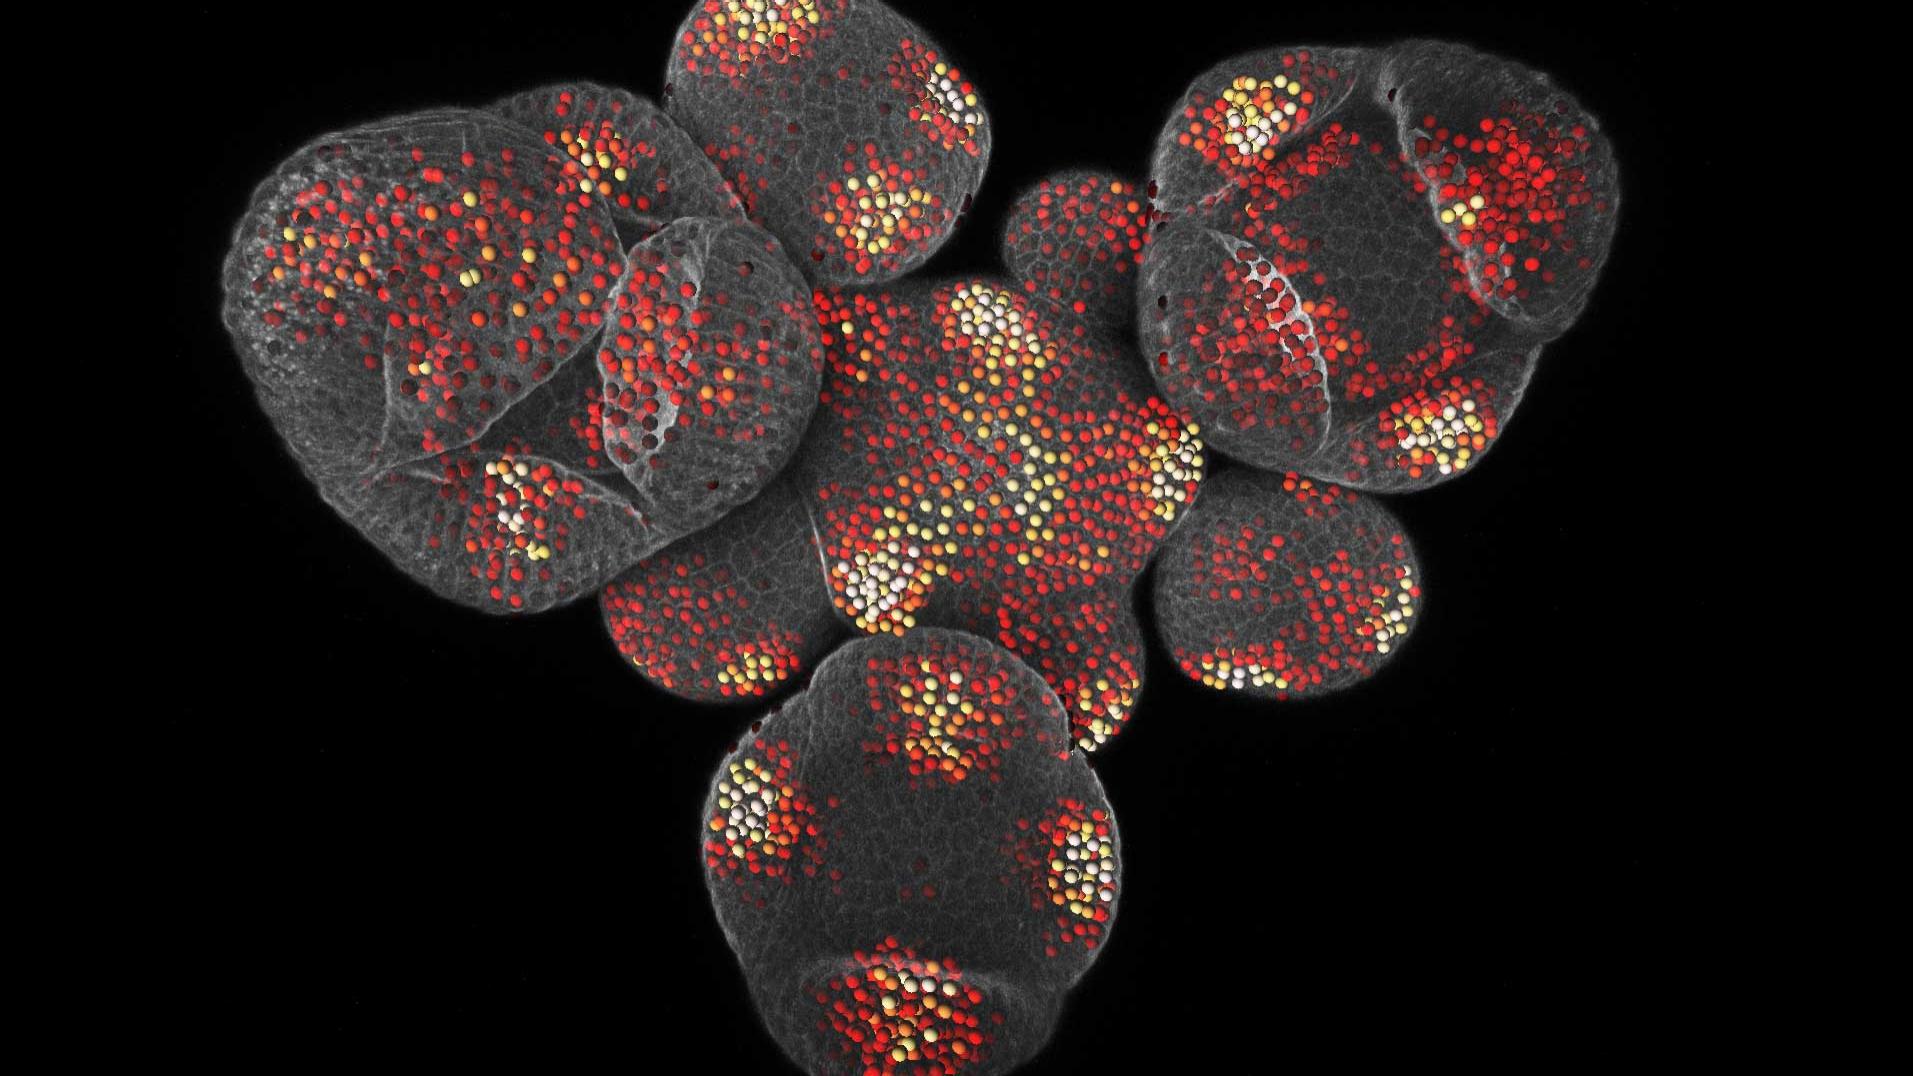 Live Arabidopsis expressing a reporter for a gene responsive to the cytokinin hormone. Imaged with Airyscan. Image courtesy of Howard Hughes Medical Institute, California Institute of Technology, USA